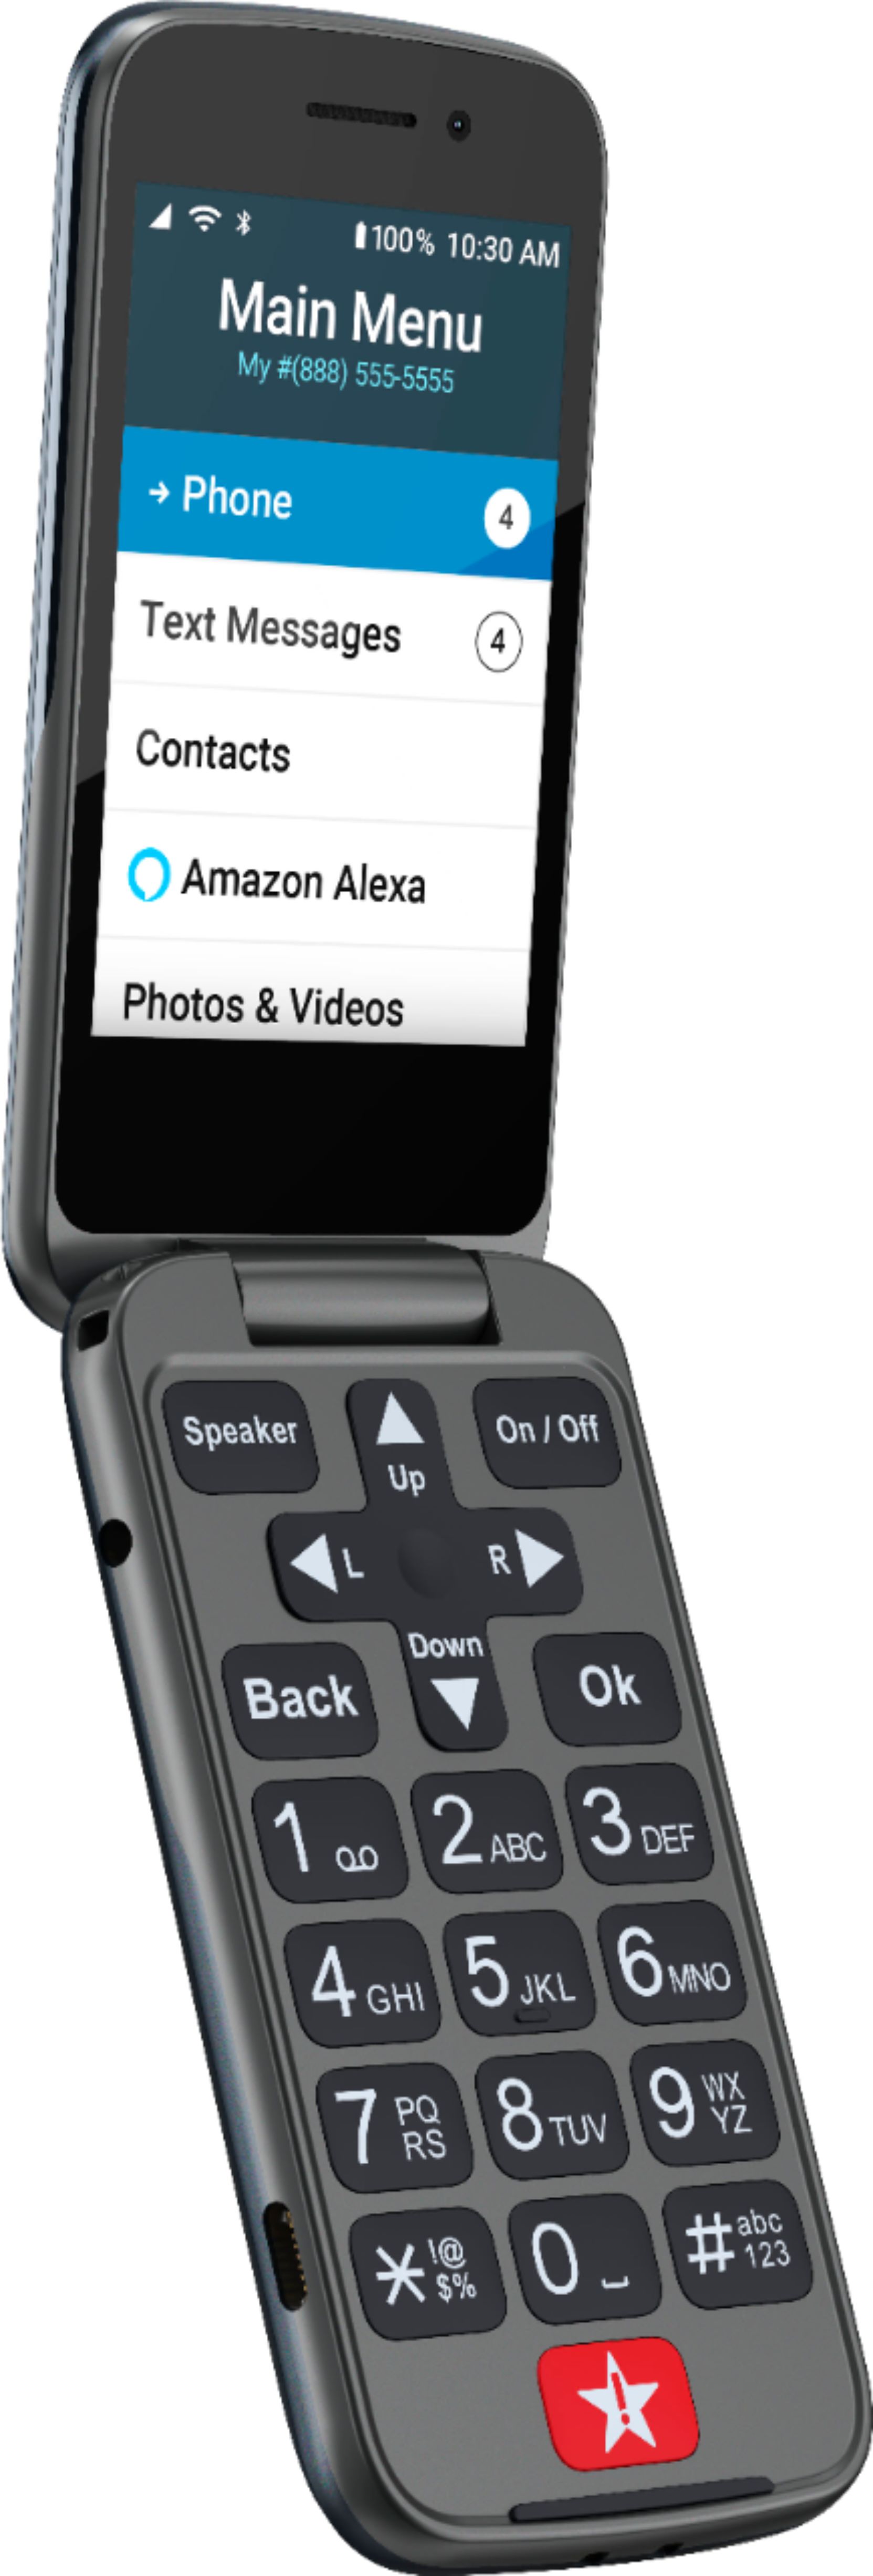 Greatcall Lively Flip Cell Phone For Seniors Gray From The Makers Of Jitterbug Gray